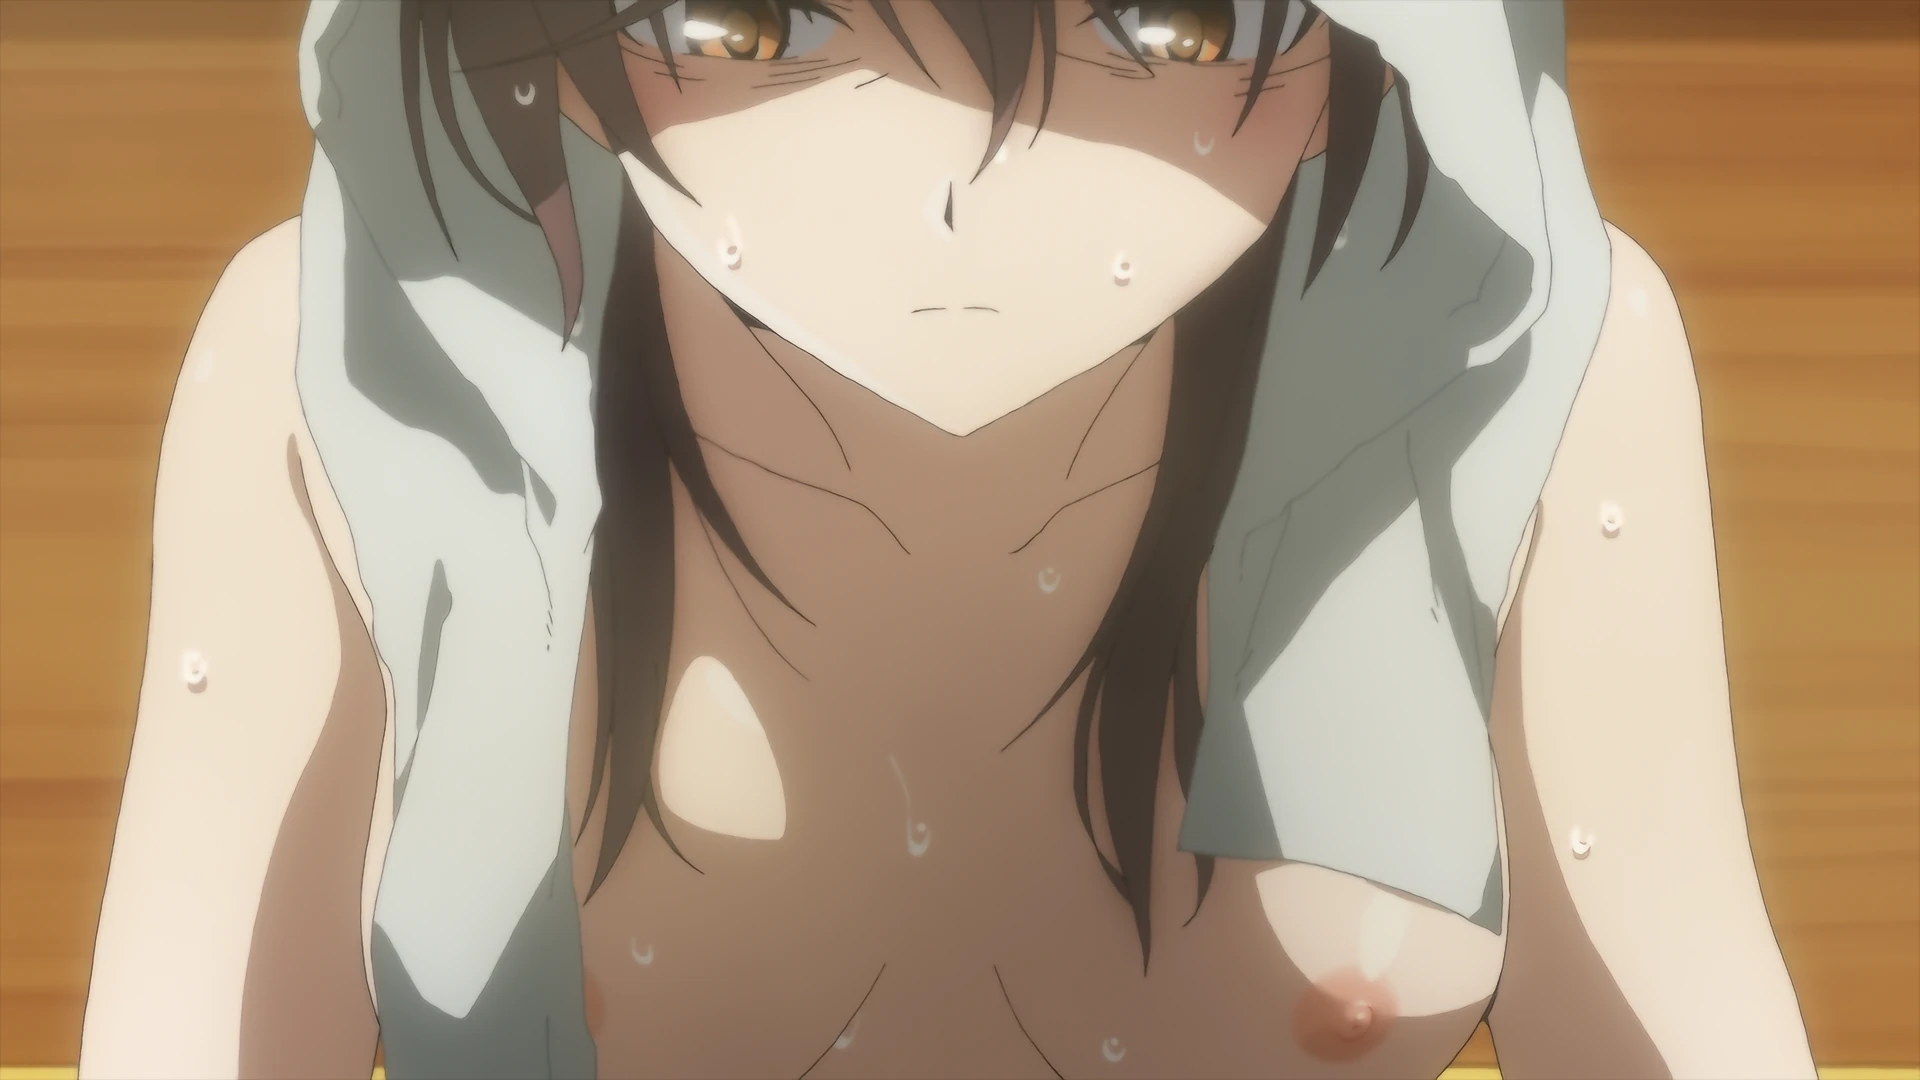 Strike Witches: Road to Berlin - E06 - Gertrud Barkhorn nude fanservice